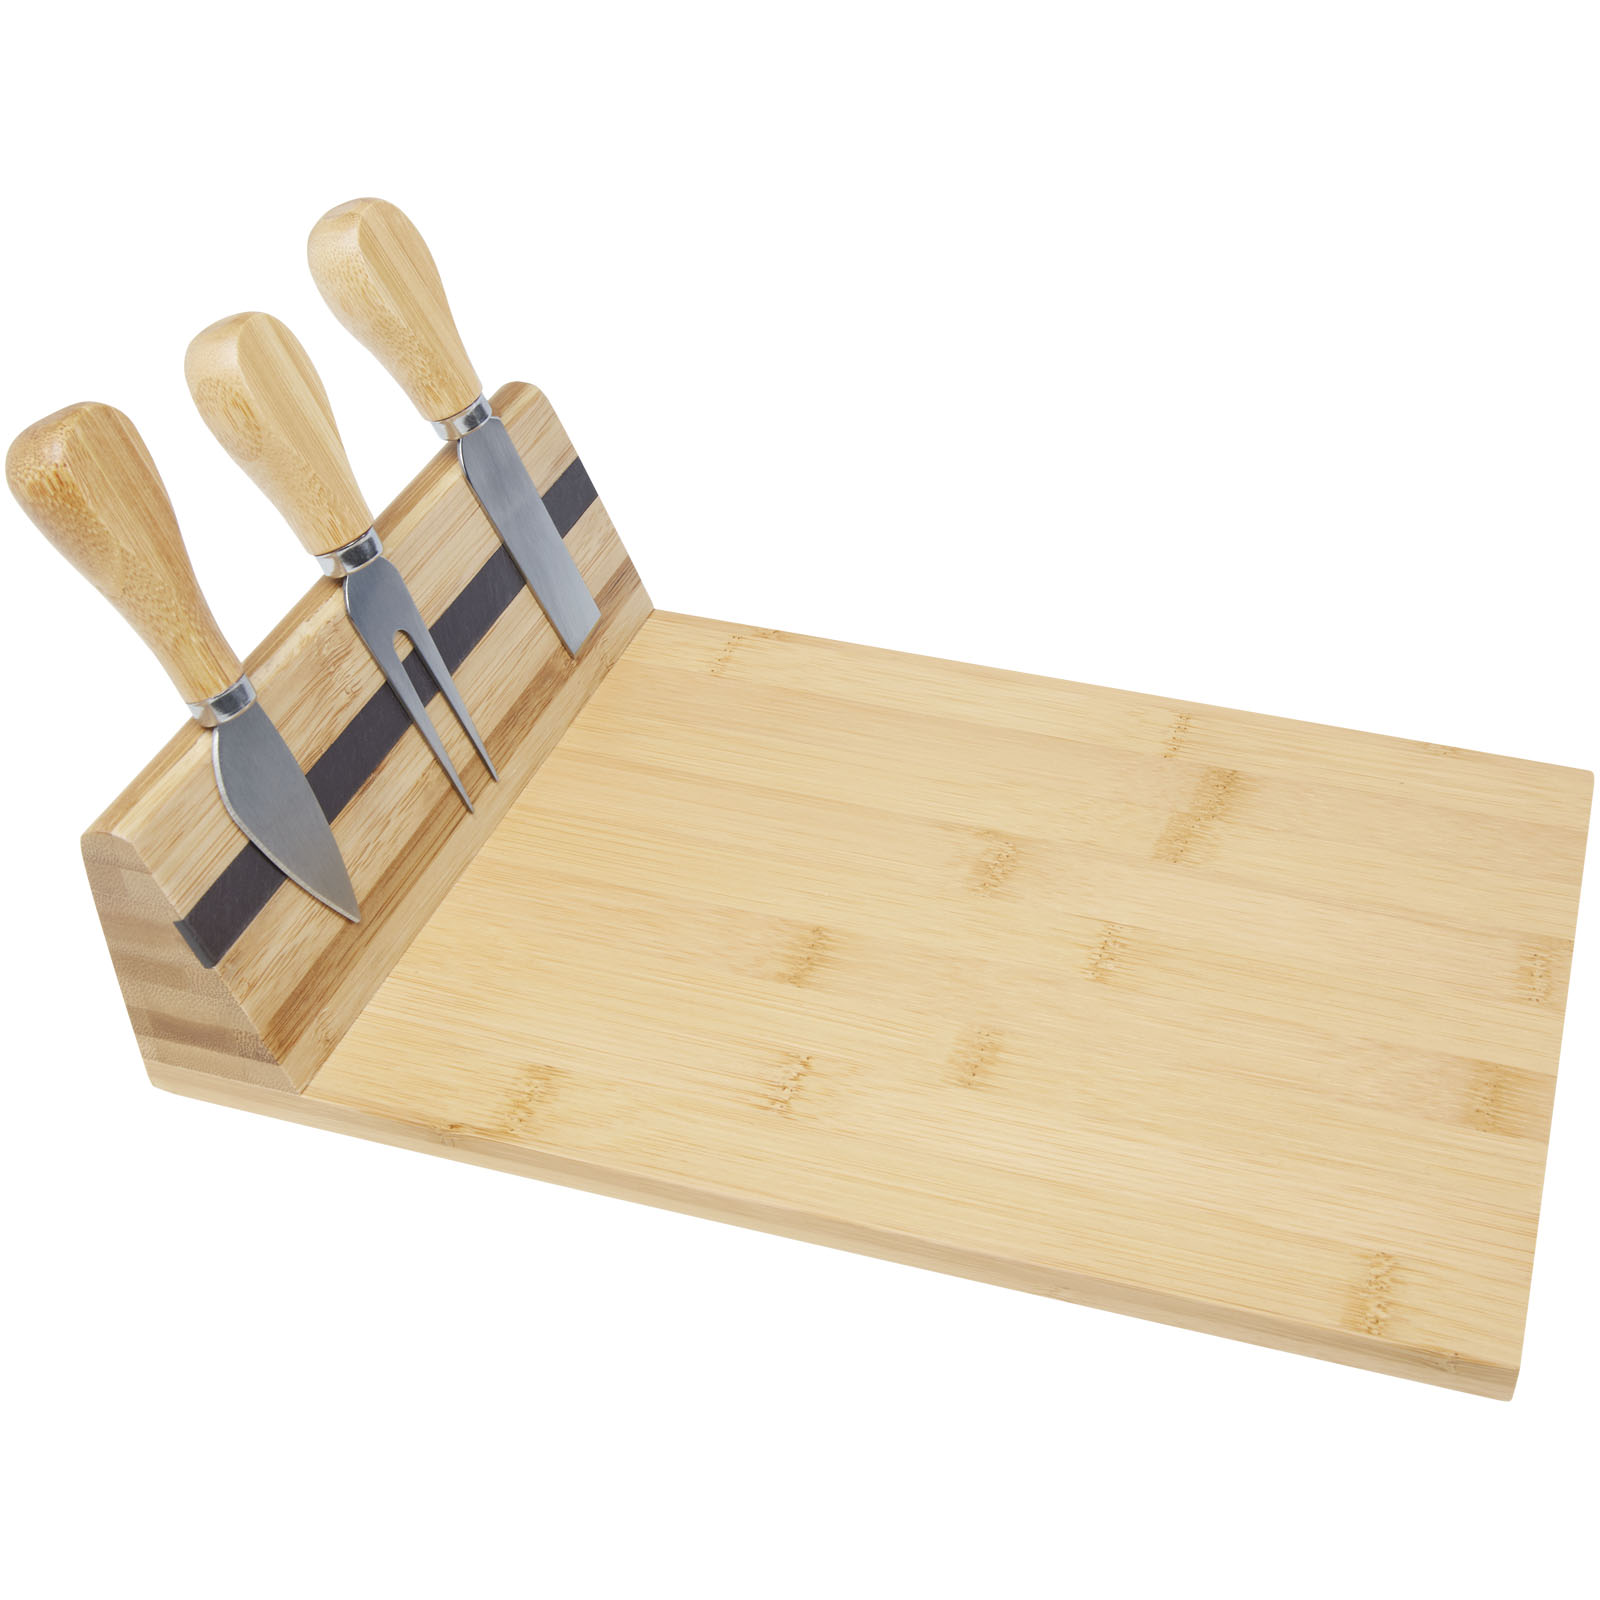 Advertising Serving Sets - Mancheg bamboo magnetic cheese board and tools